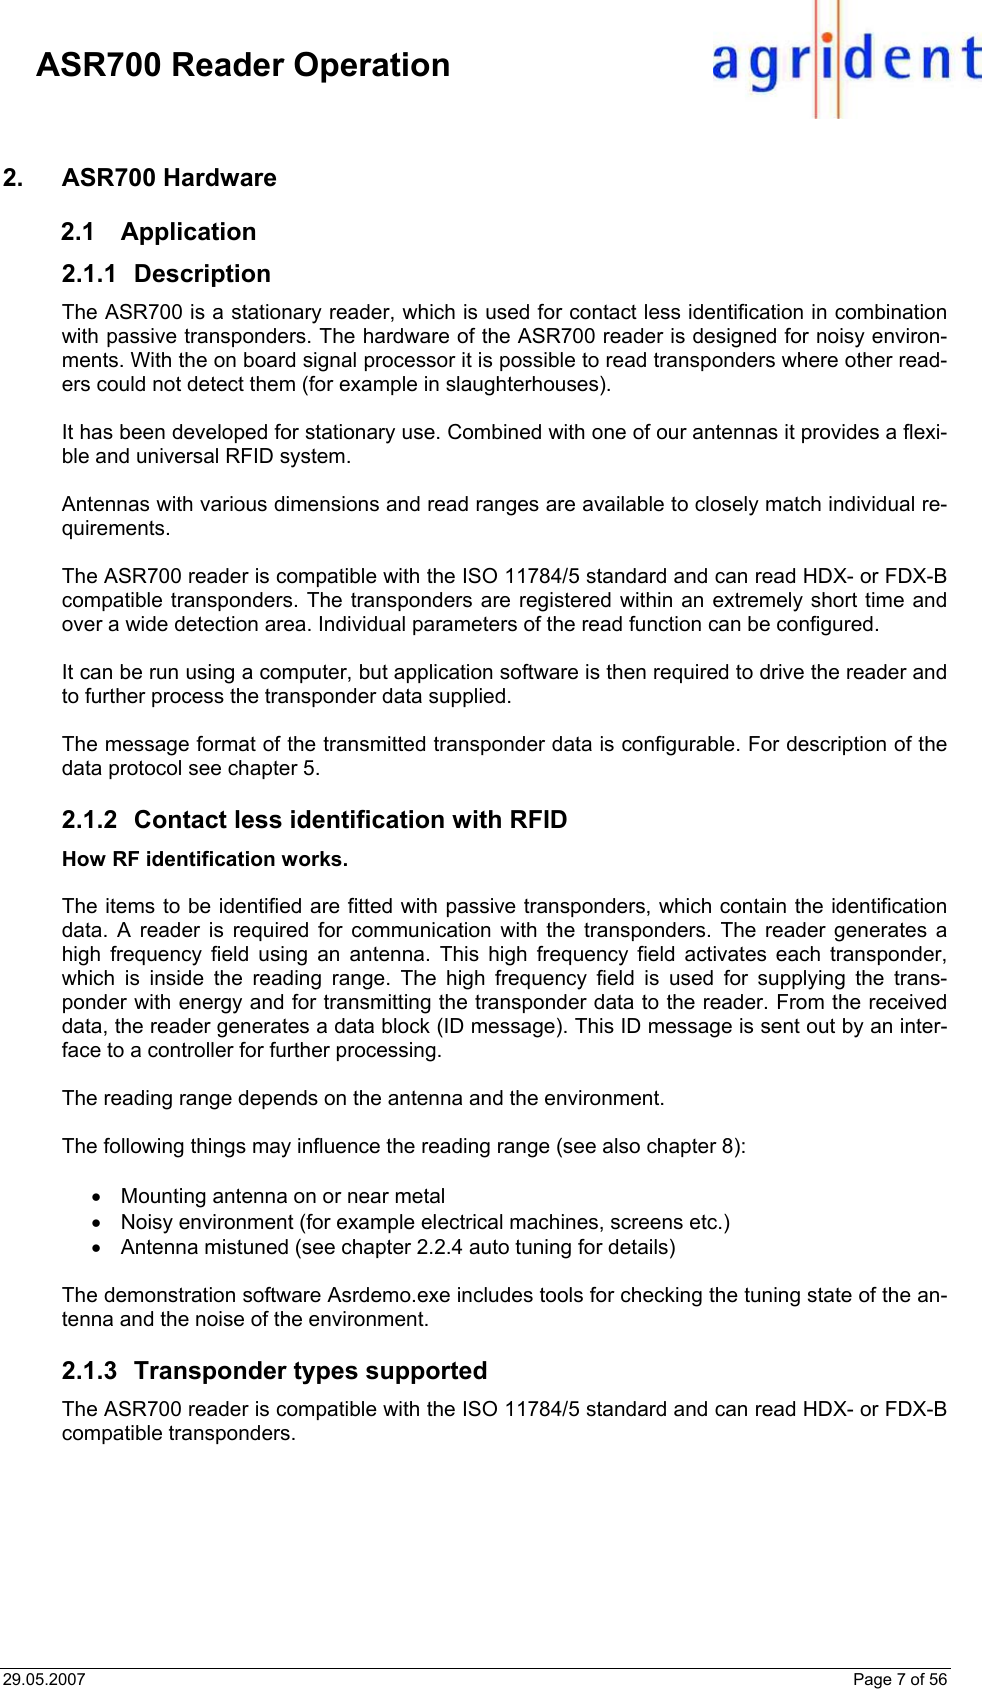 29.05.2007    Page 7 of 56     ASR700 Reader Operation 2. ASR700 Hardware 2.1 Application 2.1.1 Description The ASR700 is a stationary reader, which is used for contact less identification in combination with passive transponders. The hardware of the ASR700 reader is designed for noisy environ-ments. With the on board signal processor it is possible to read transponders where other read-ers could not detect them (for example in slaughterhouses).   It has been developed for stationary use. Combined with one of our antennas it provides a flexi-ble and universal RFID system.  Antennas with various dimensions and read ranges are available to closely match individual re-quirements.   The ASR700 reader is compatible with the ISO 11784/5 standard and can read HDX- or FDX-B compatible transponders. The transponders are registered within an extremely short time and over a wide detection area. Individual parameters of the read function can be configured.  It can be run using a computer, but application software is then required to drive the reader and to further process the transponder data supplied.  The message format of the transmitted transponder data is configurable. For description of the data protocol see chapter 5.  2.1.2  Contact less identification with RFID How RF identification works.  The items to be identified are fitted with passive transponders, which contain the identification data. A reader is required for communication with the transponders. The reader generates a high frequency field using an antenna. This high frequency field activates each transponder, which is inside the reading range. The high frequency field is used for supplying the trans-ponder with energy and for transmitting the transponder data to the reader. From the received data, the reader generates a data block (ID message). This ID message is sent out by an inter-face to a controller for further processing.  The reading range depends on the antenna and the environment.  The following things may influence the reading range (see also chapter 8):  •  Mounting antenna on or near metal •  Noisy environment (for example electrical machines, screens etc.) •  Antenna mistuned (see chapter 2.2.4 auto tuning for details)  The demonstration software Asrdemo.exe includes tools for checking the tuning state of the an-tenna and the noise of the environment.  2.1.3  Transponder types supported The ASR700 reader is compatible with the ISO 11784/5 standard and can read HDX- or FDX-B compatible transponders.    